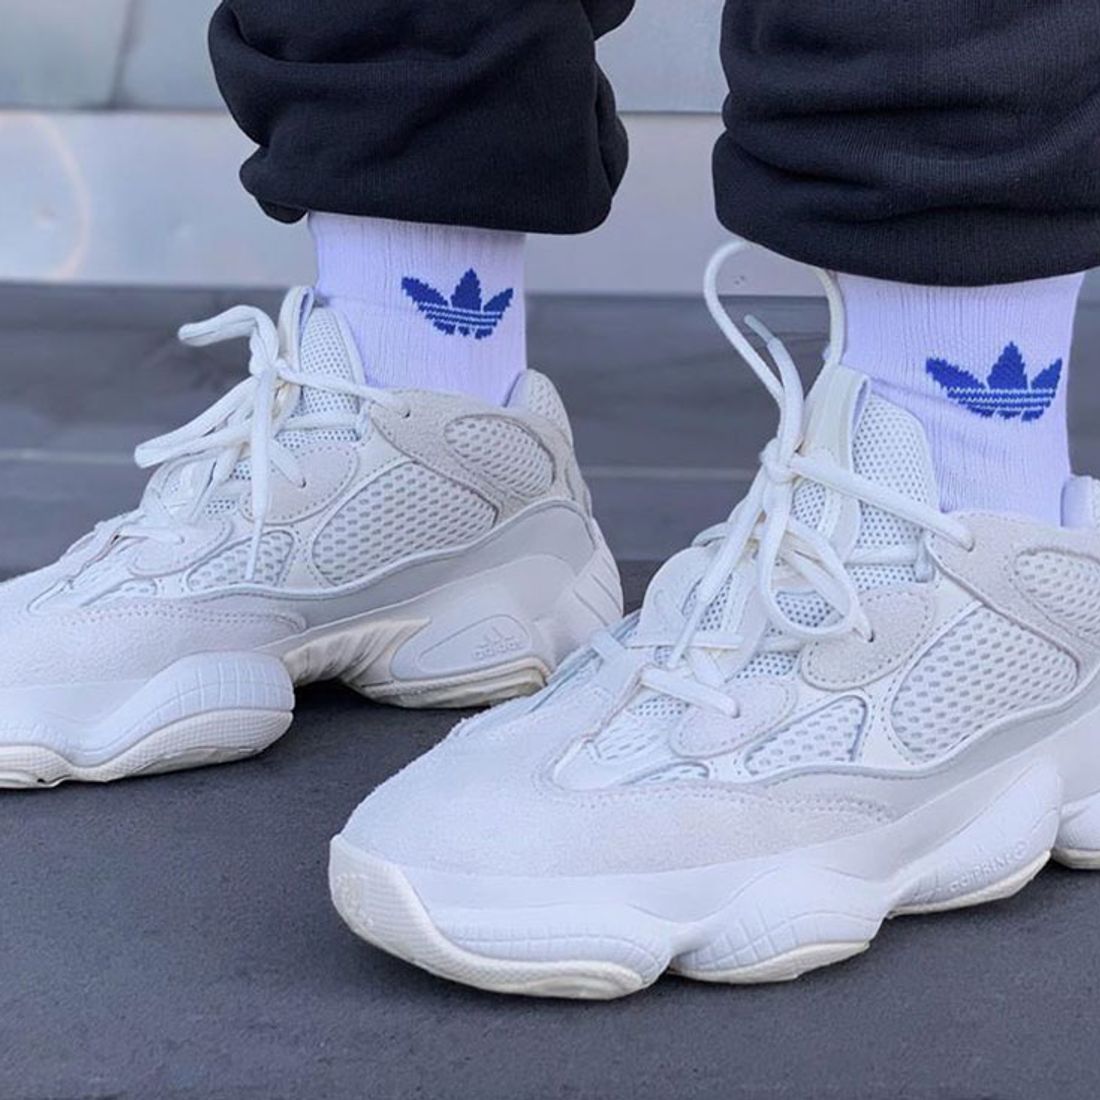 Here's How People Are Styling the Yeezy 'Bone White' - Sneaker Freaker